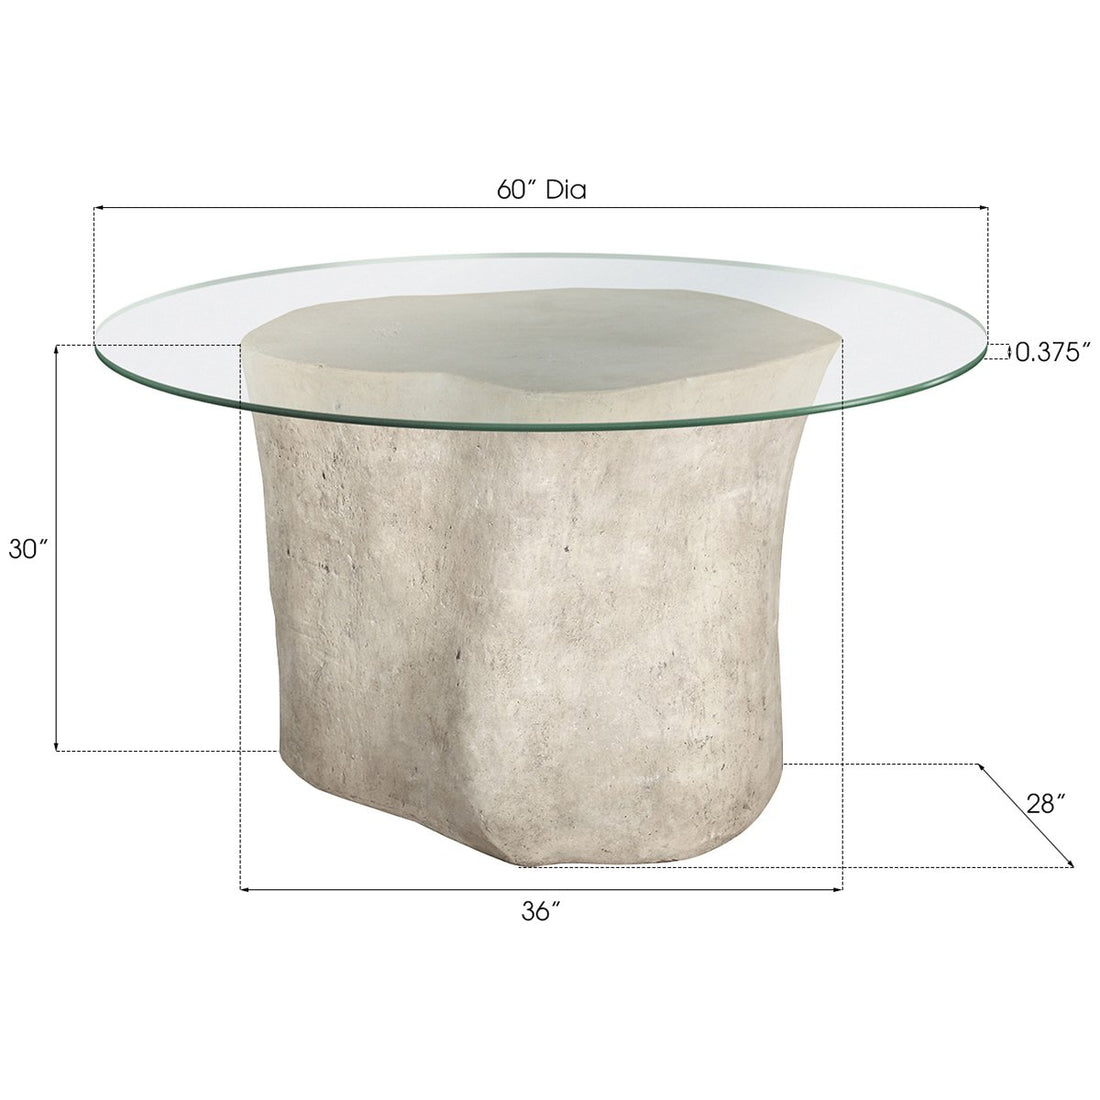 Phillips Collection Log Outdoor Dining Table, Roman Stone